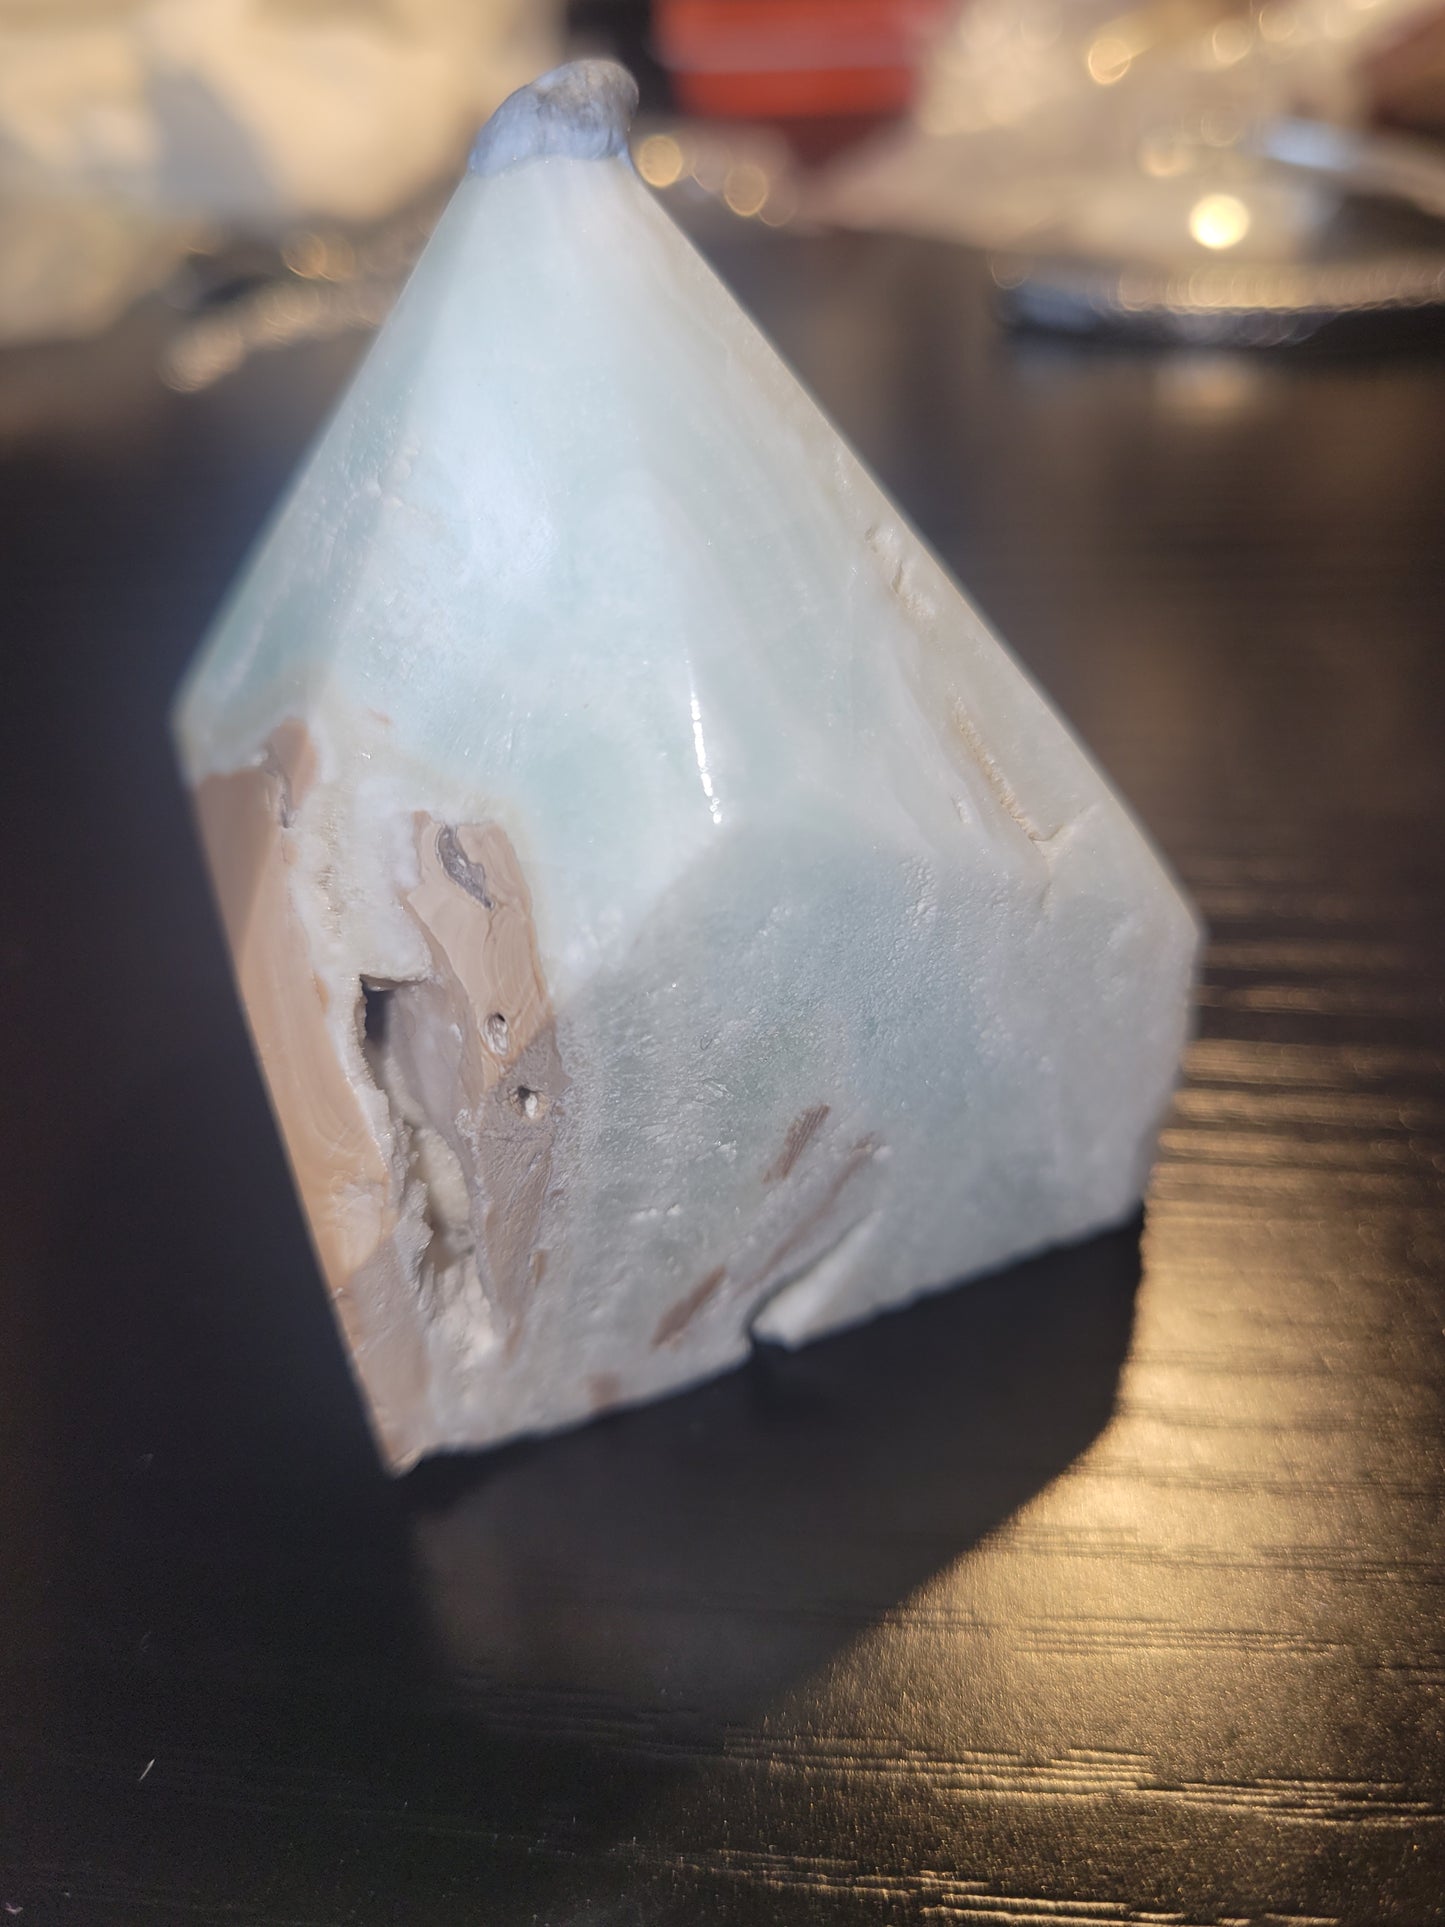 Carribean Calcite Top point